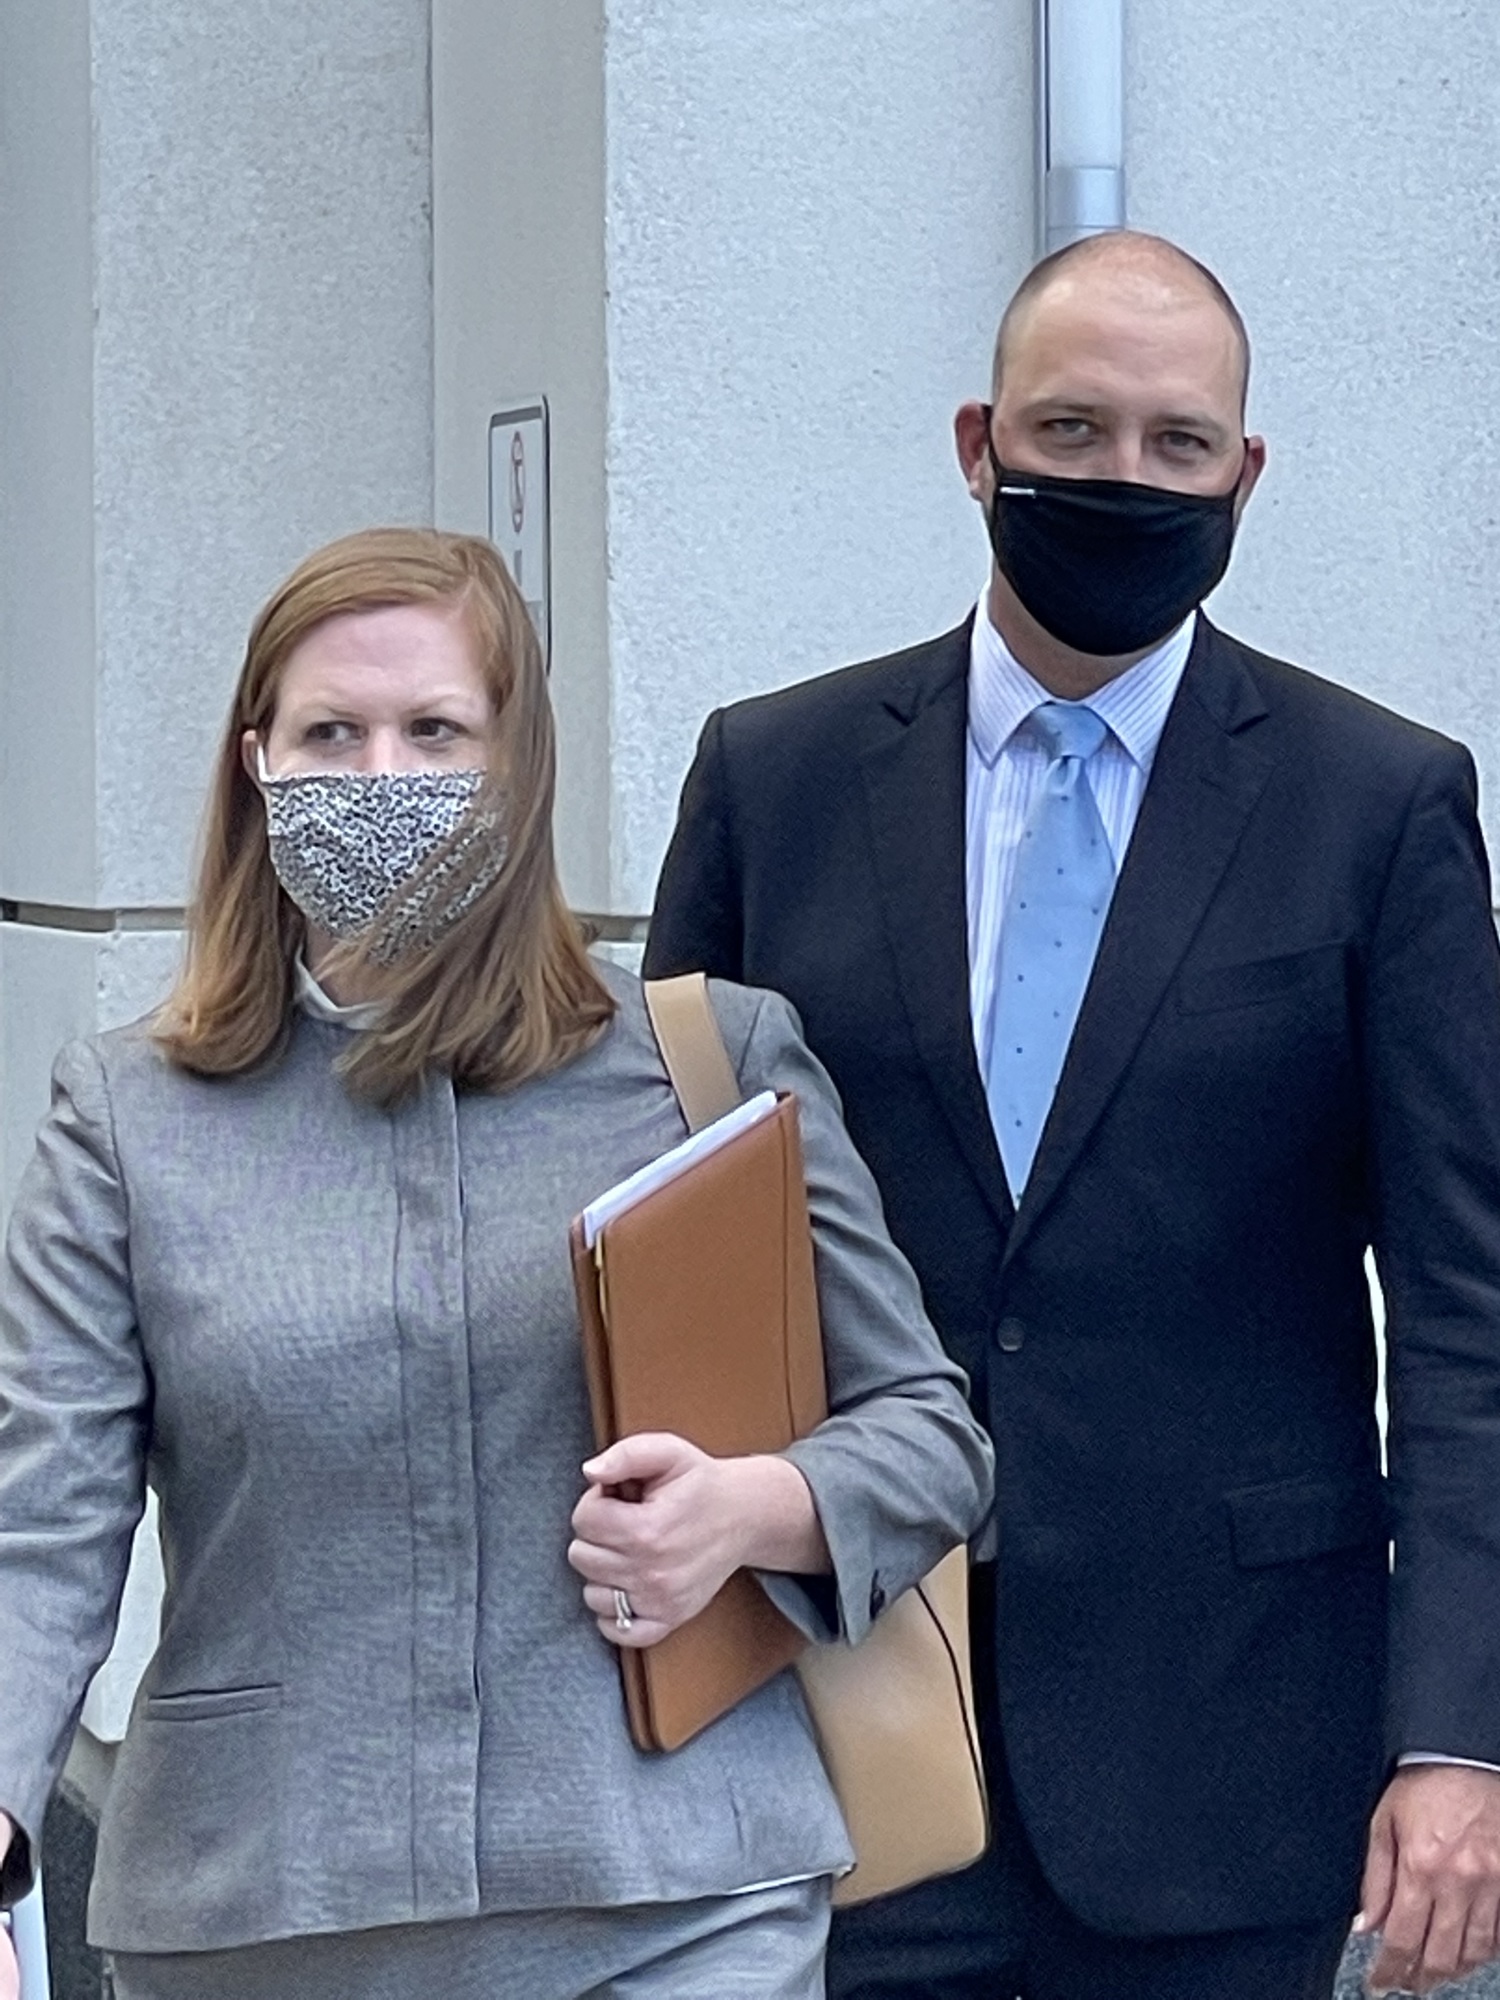 Former JEA Chief Financial Officer Ryan Wannemacher leaves the federal courthouse Downtown on March 8 with his attorney Catherine M. Licandro after pleading not guilty to federal charges.